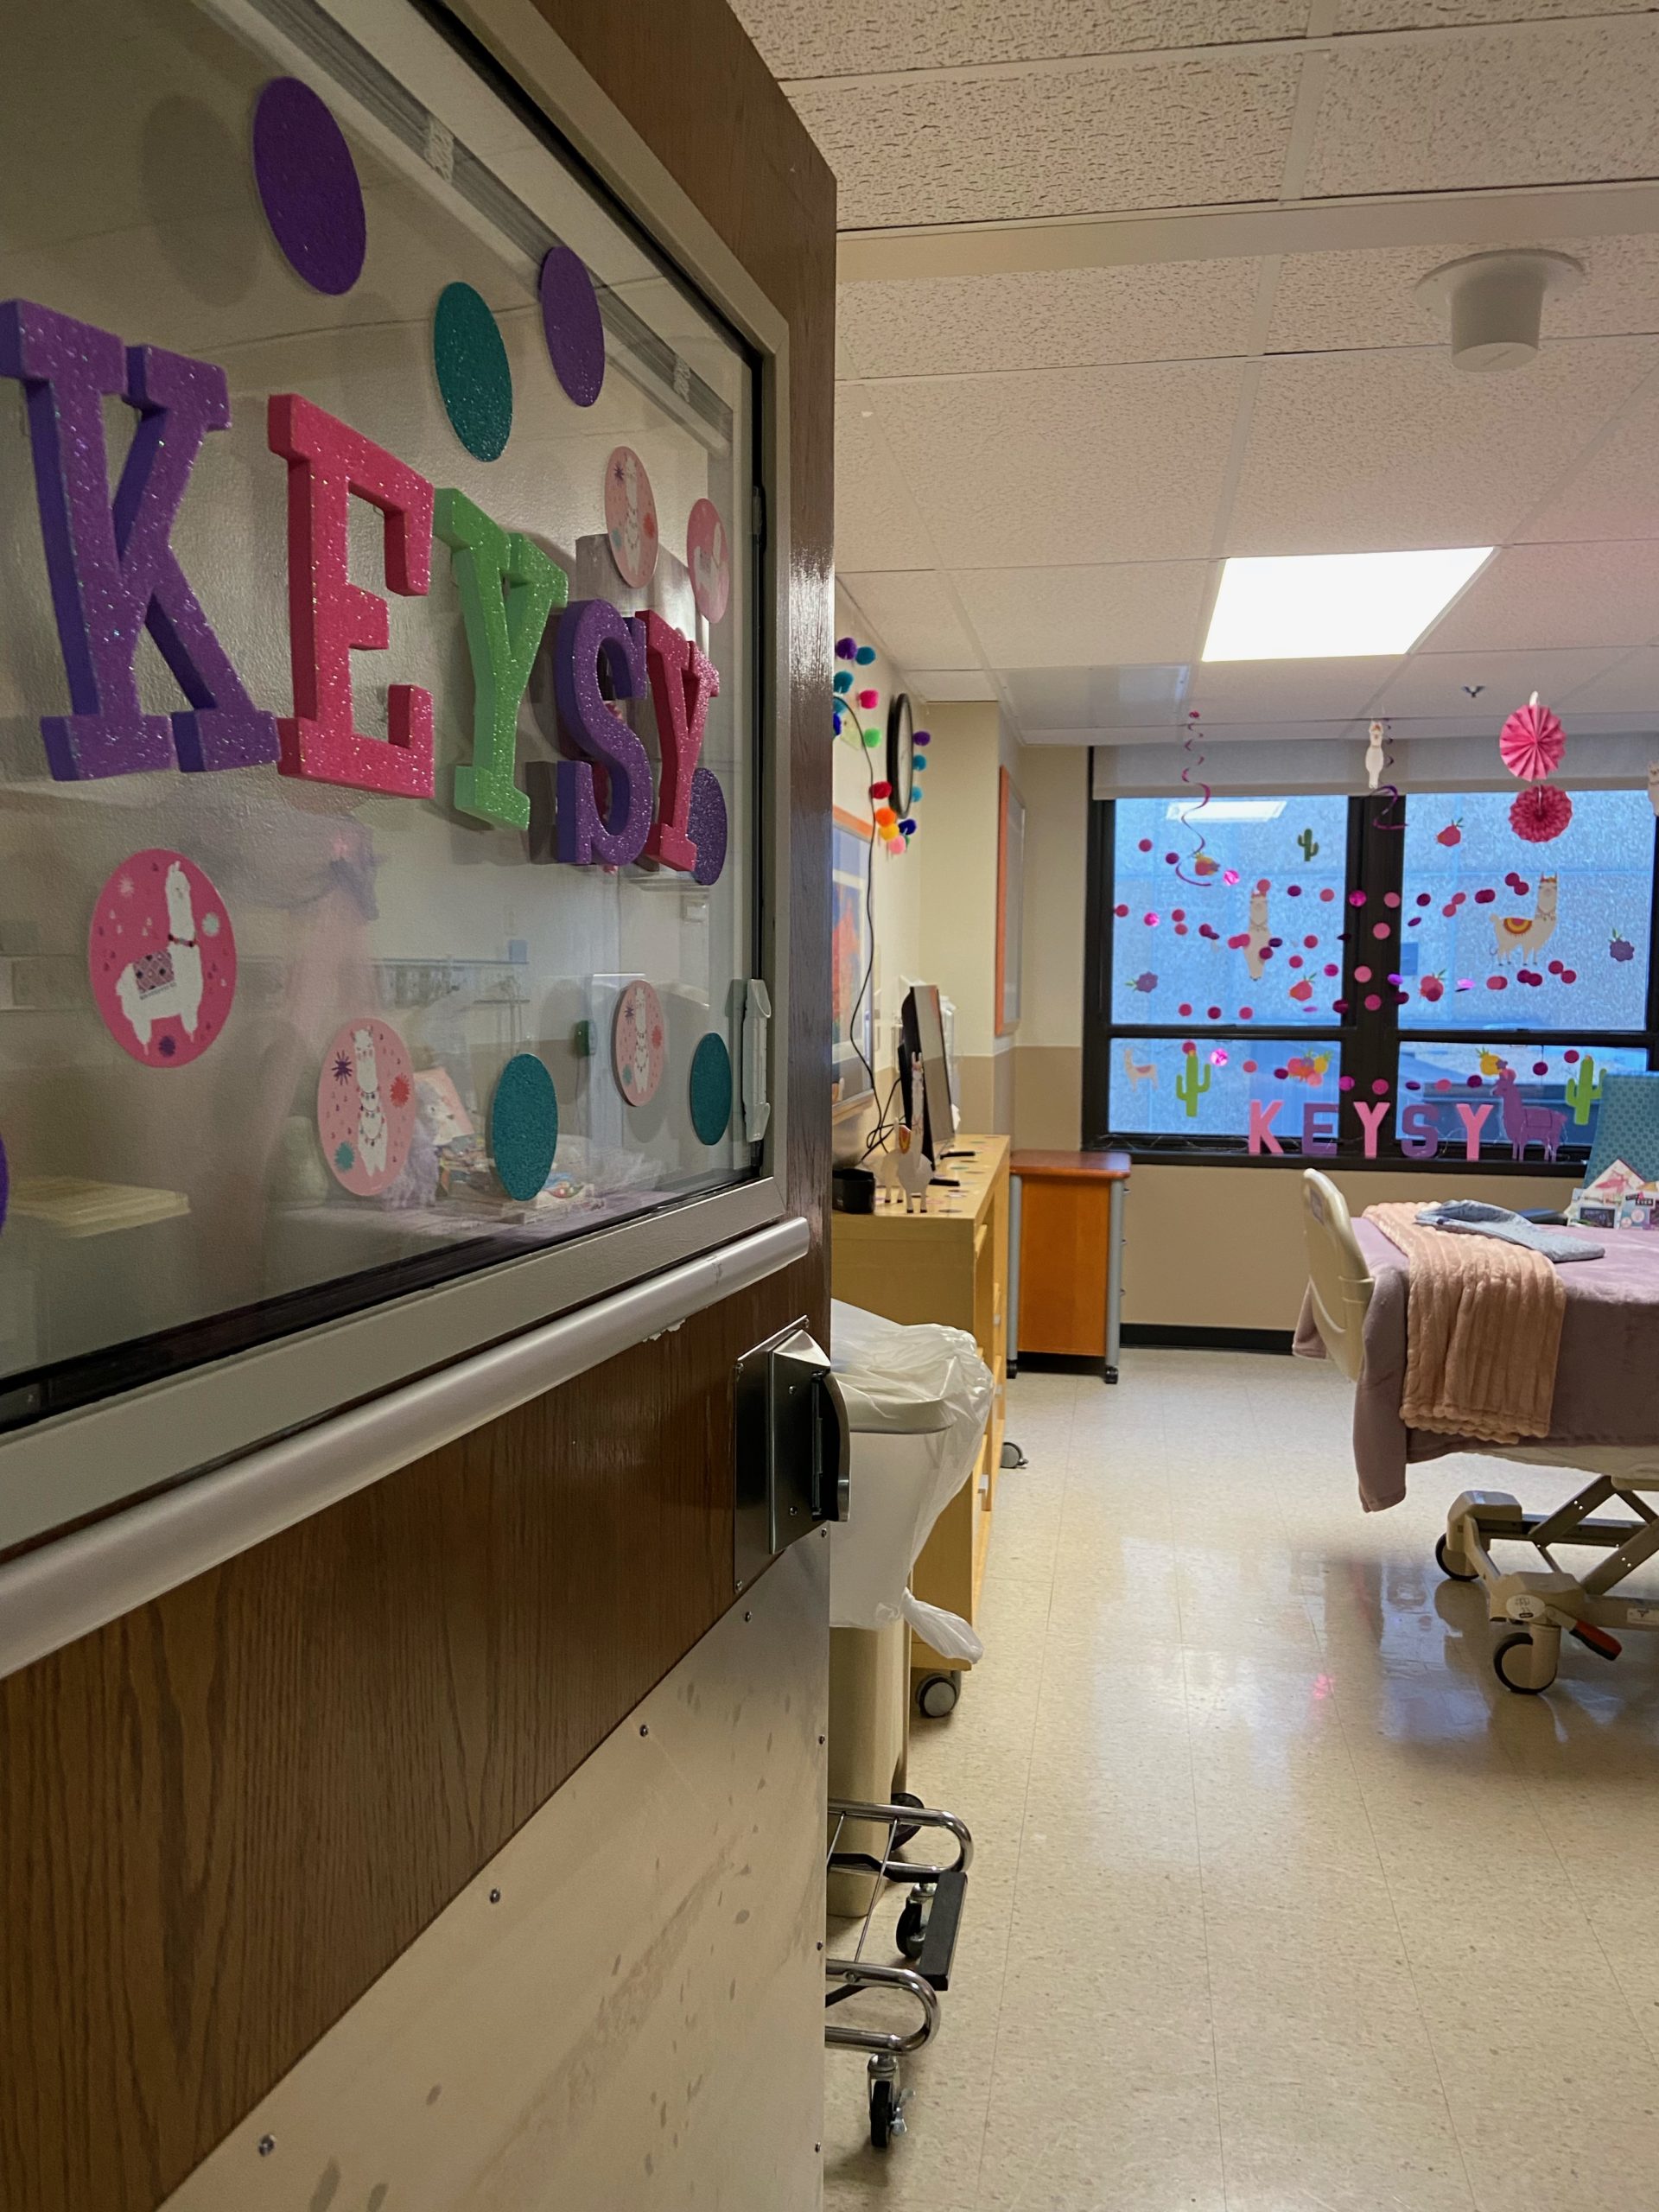 the door to a hospital room is open inside the room is decorated with pink wall hangings